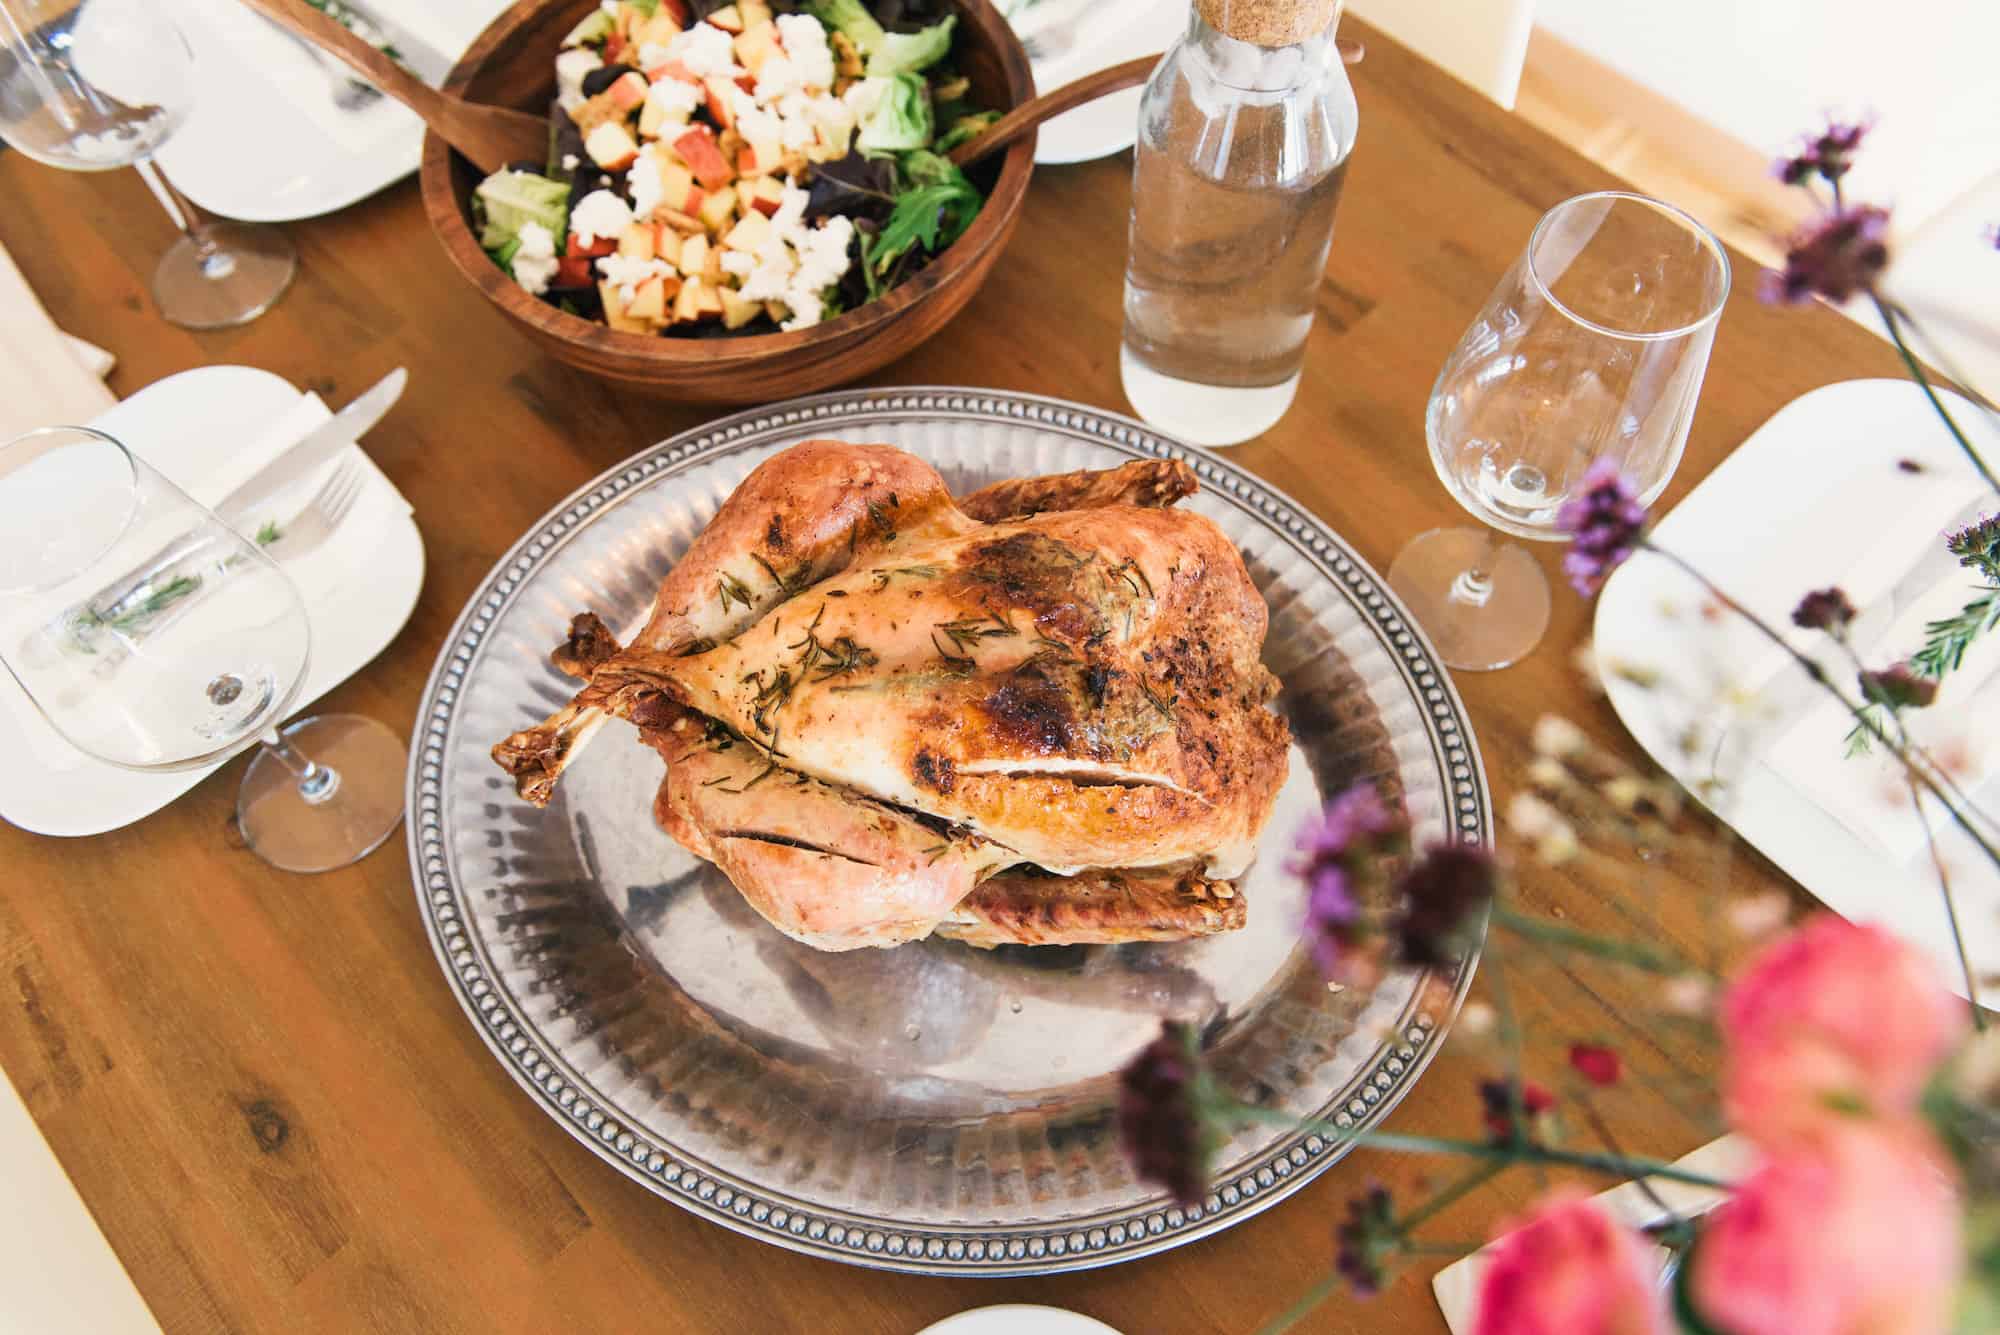 A Thankgiving roasted turkey served in a silver platter.